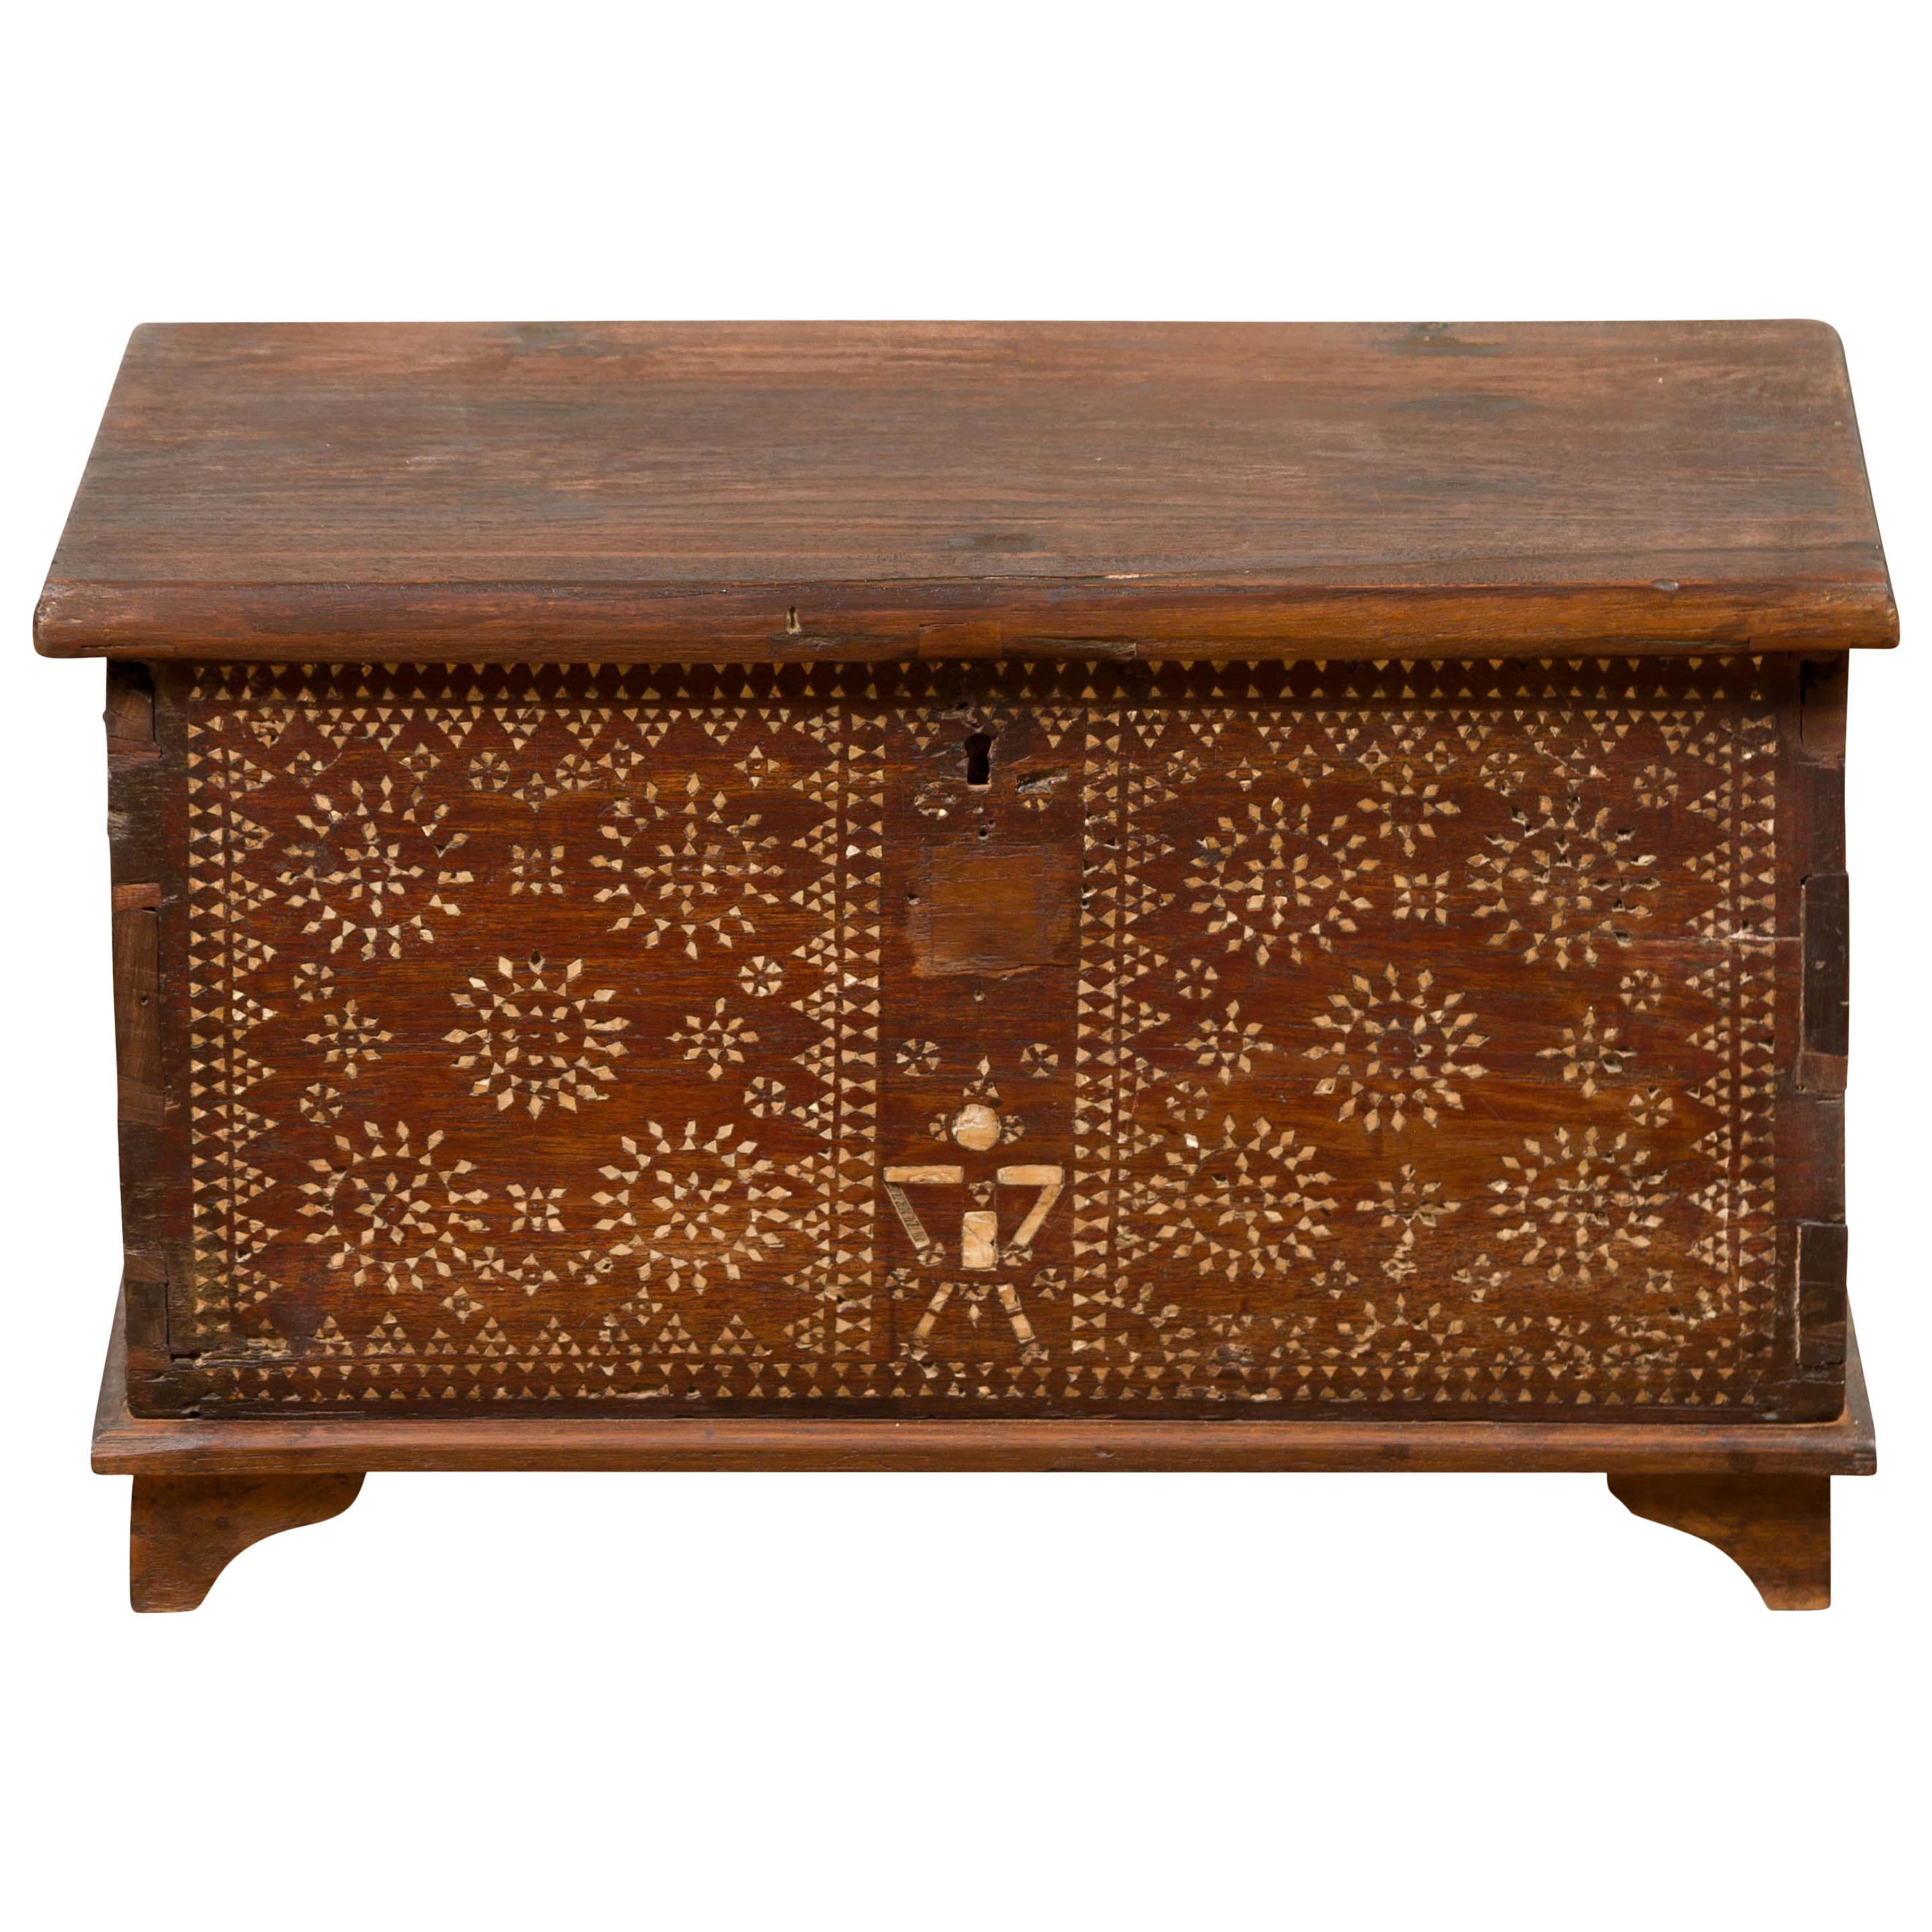 Indonesian Blanket Chest from Madura with Geometric Mother of Pearl Inlay